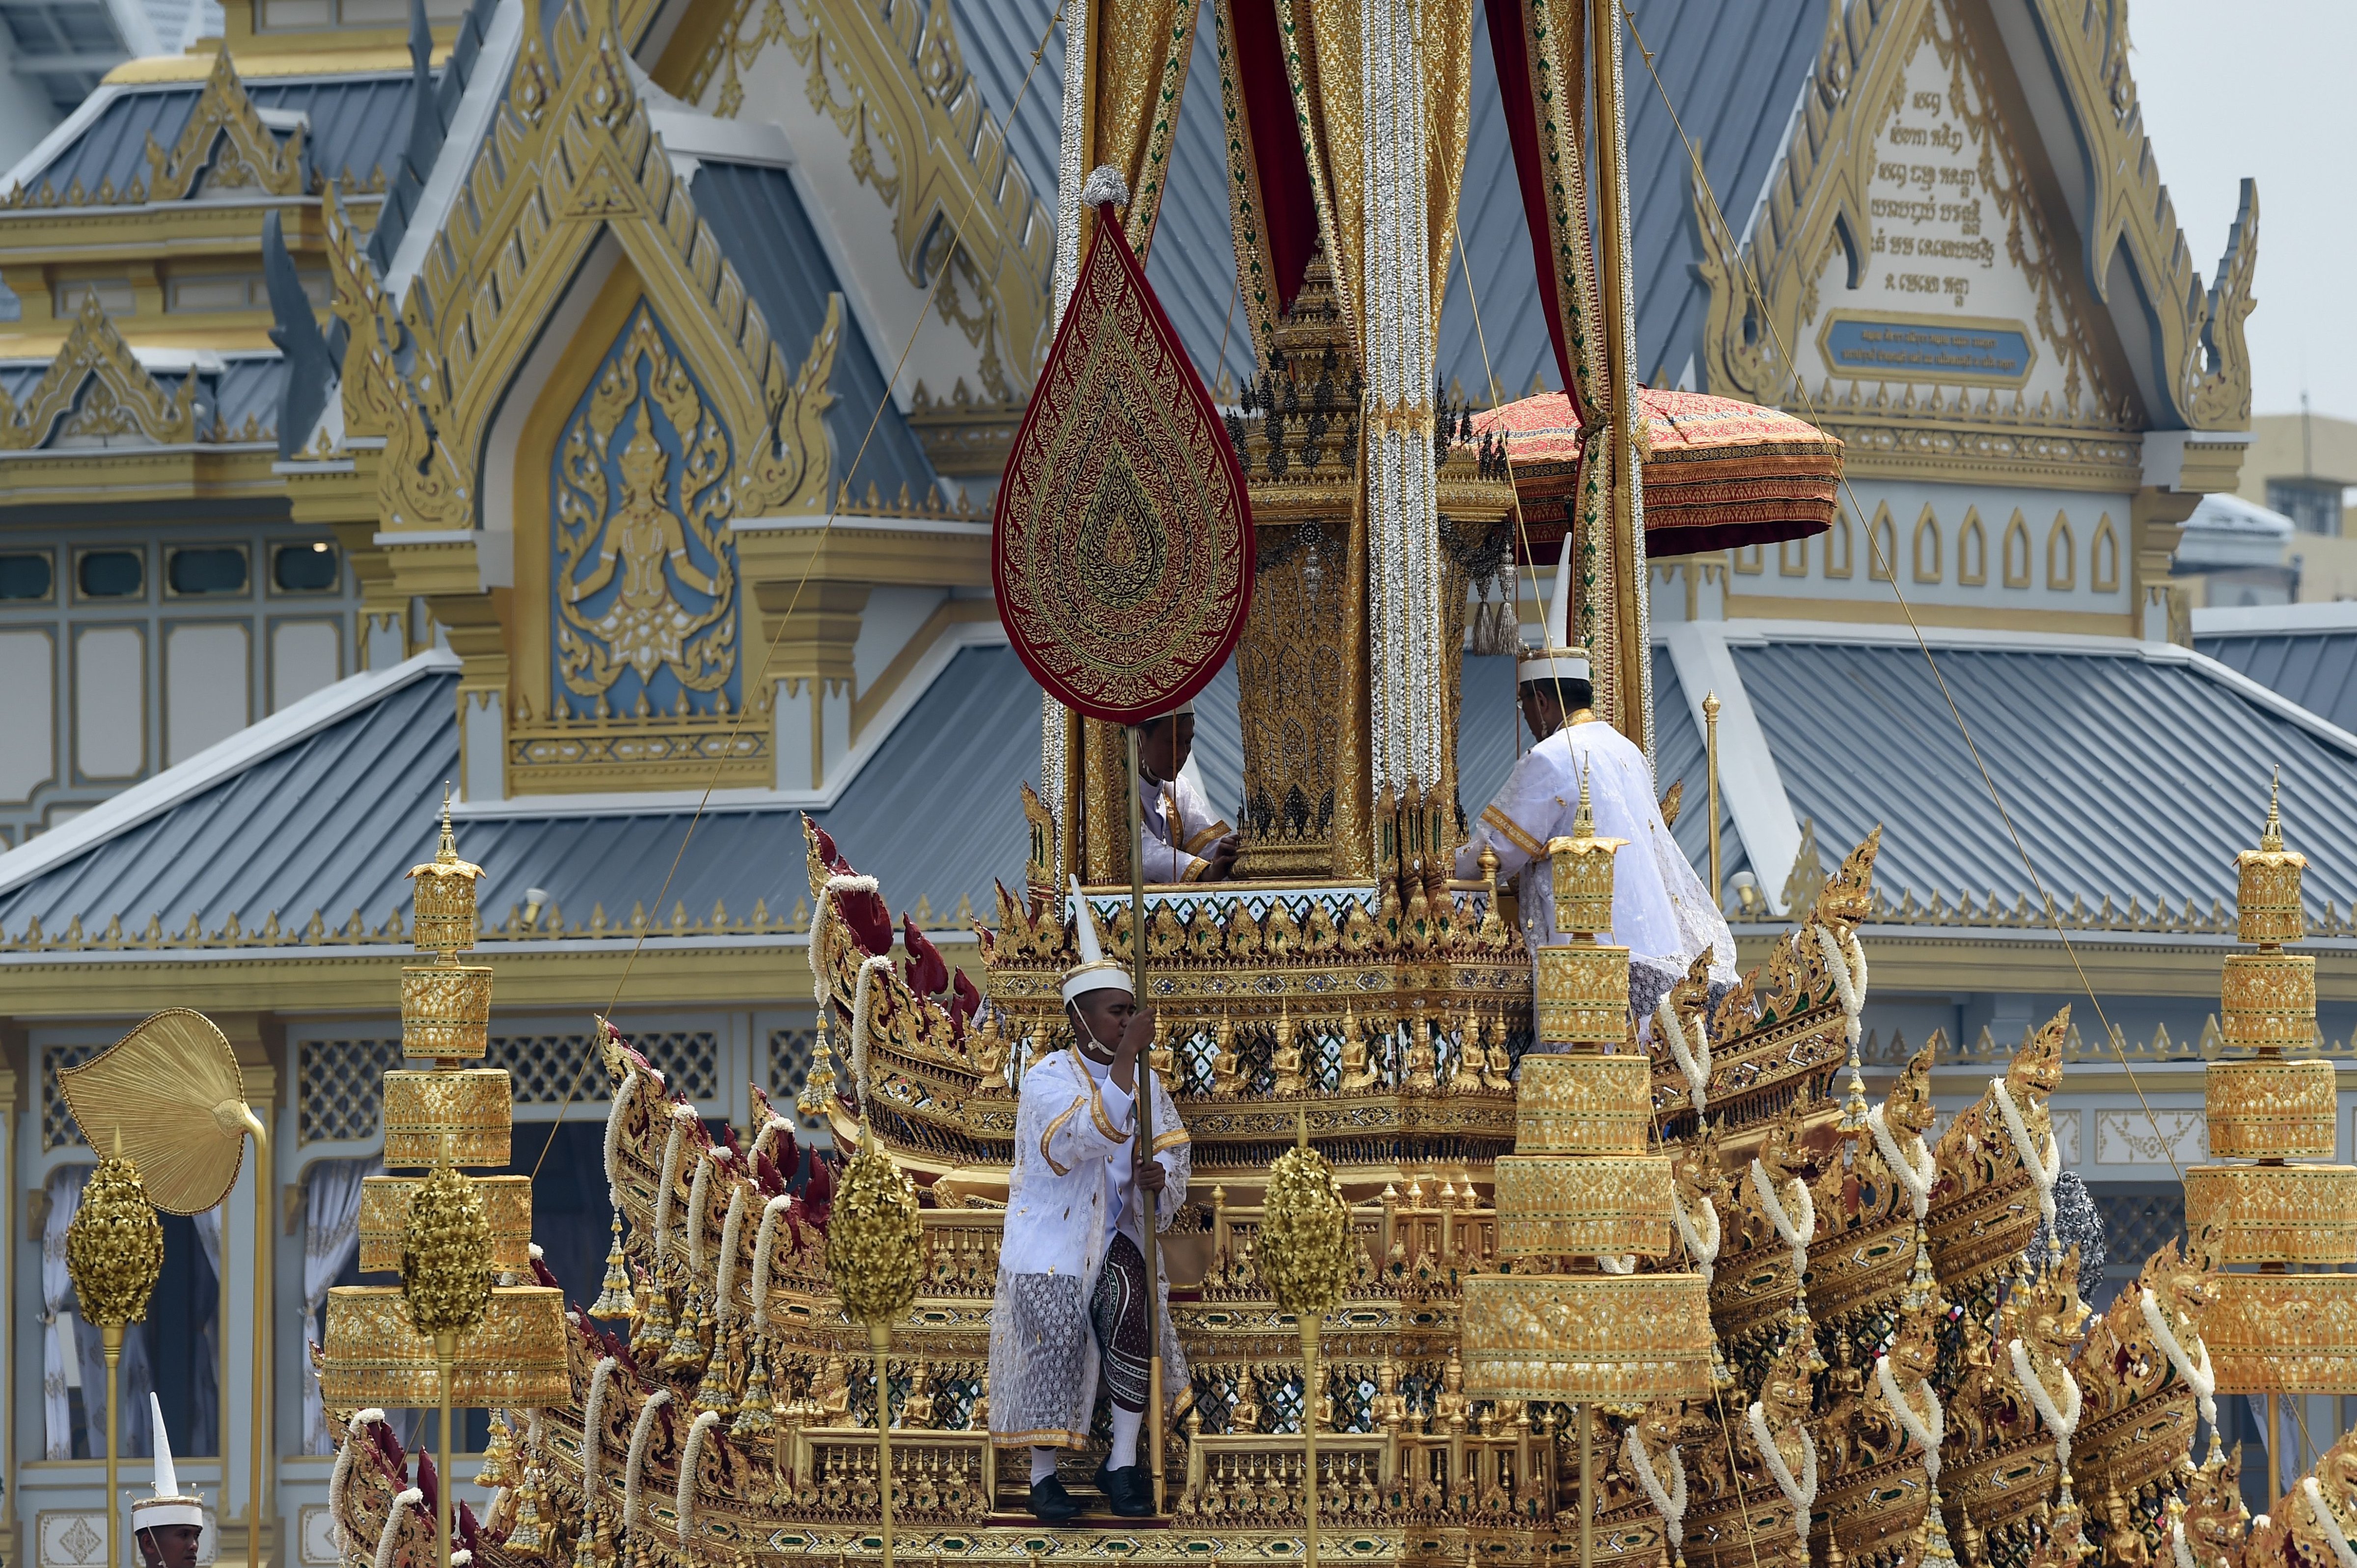 Thai royal doctors take part in the funeral procession for the late Thai king Bhumibol Adulyadej in Bangkok on Oct. 26, 2017. (Lillian Suwanrumpha—AFP/Getty Images)